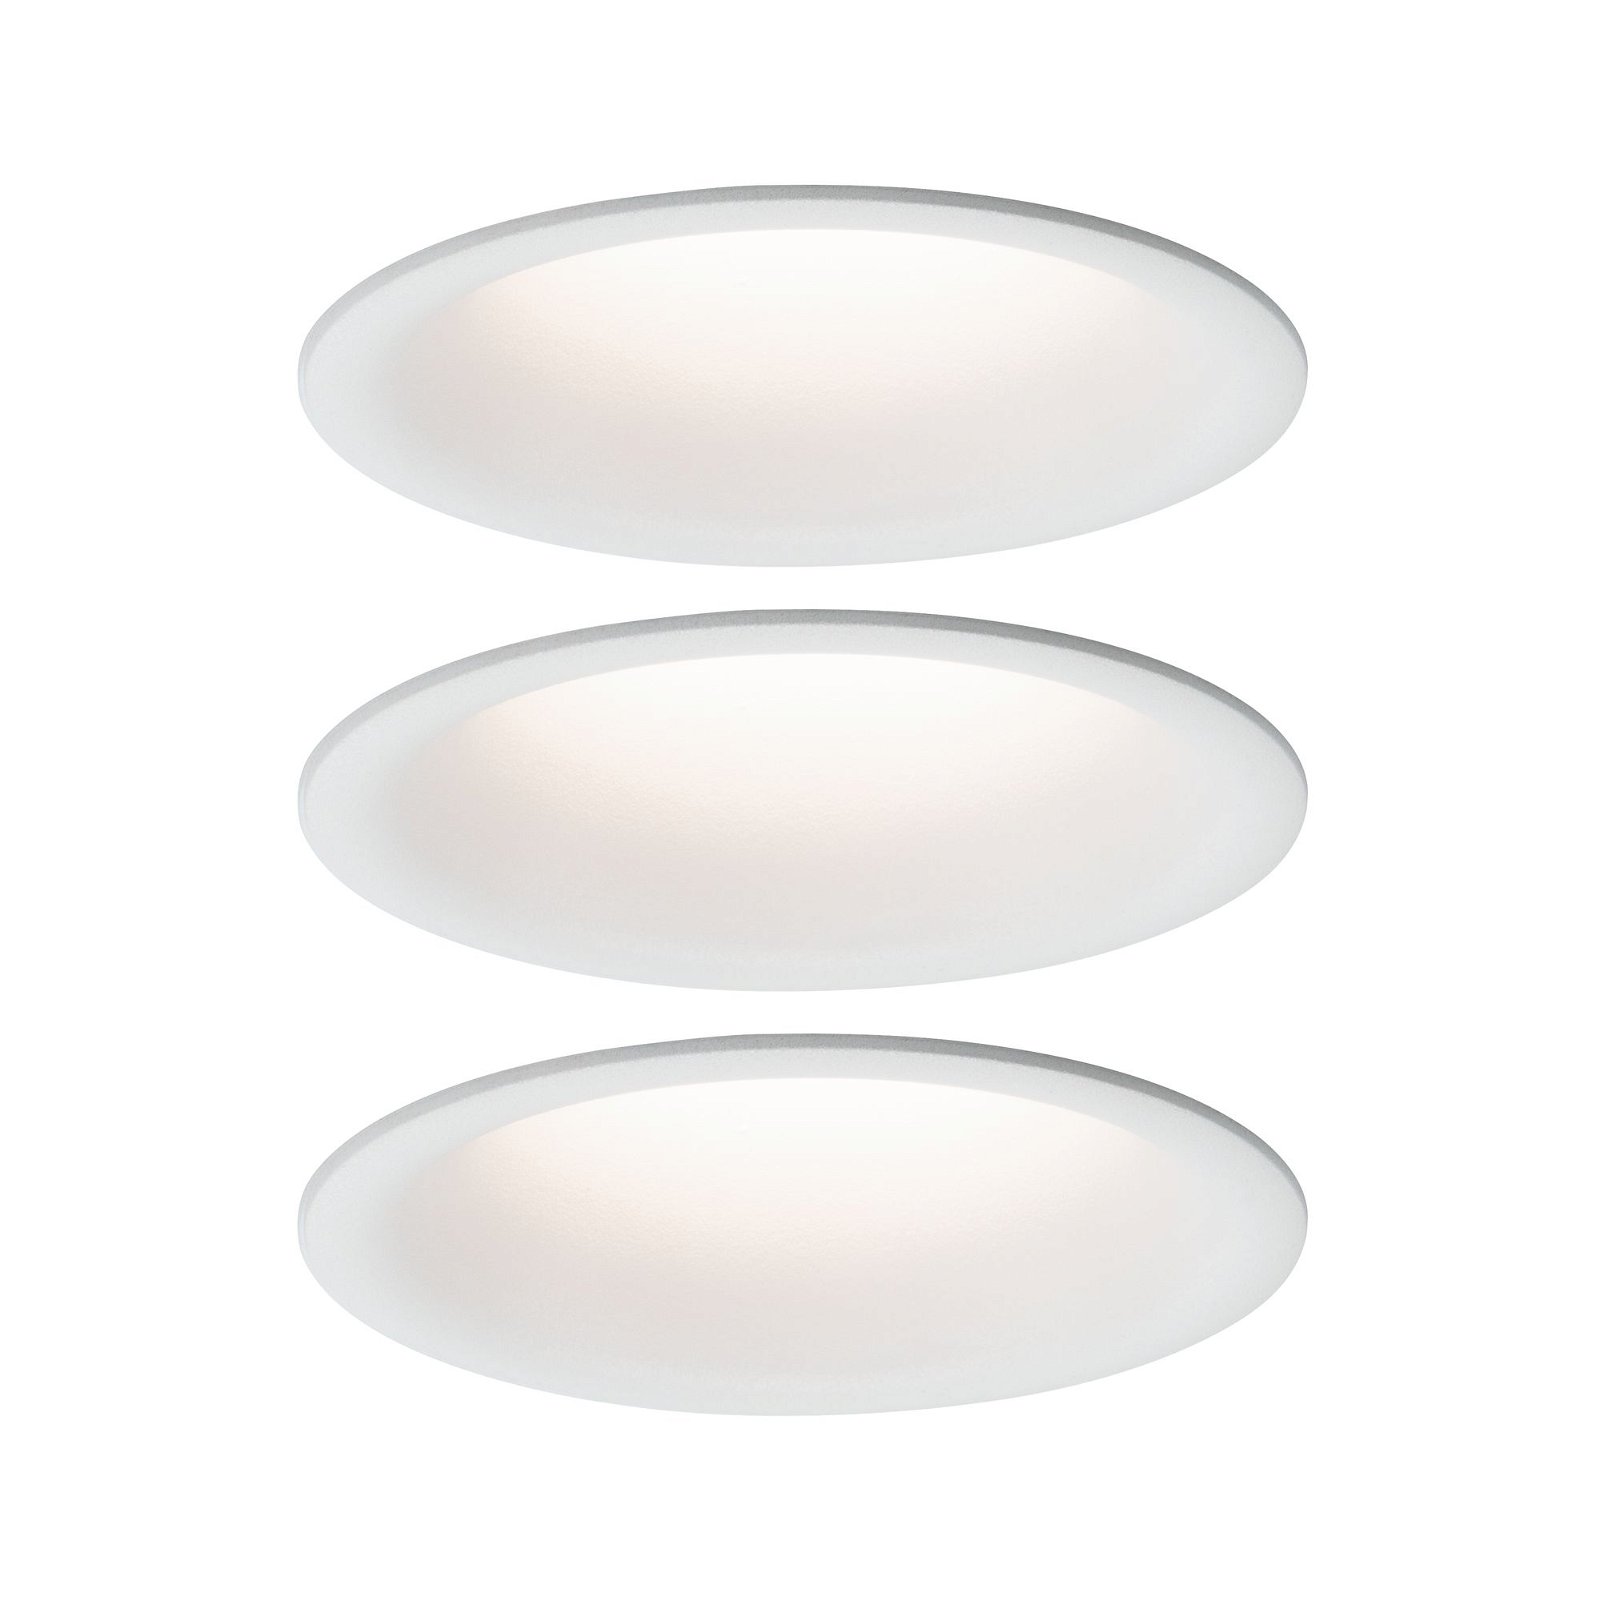 LED Recessed luminaire Cymbal Coin Basic Set IP44 round 77mm Coin 3x6,7W 3x430lm 230V dimmable 2700K Matt white